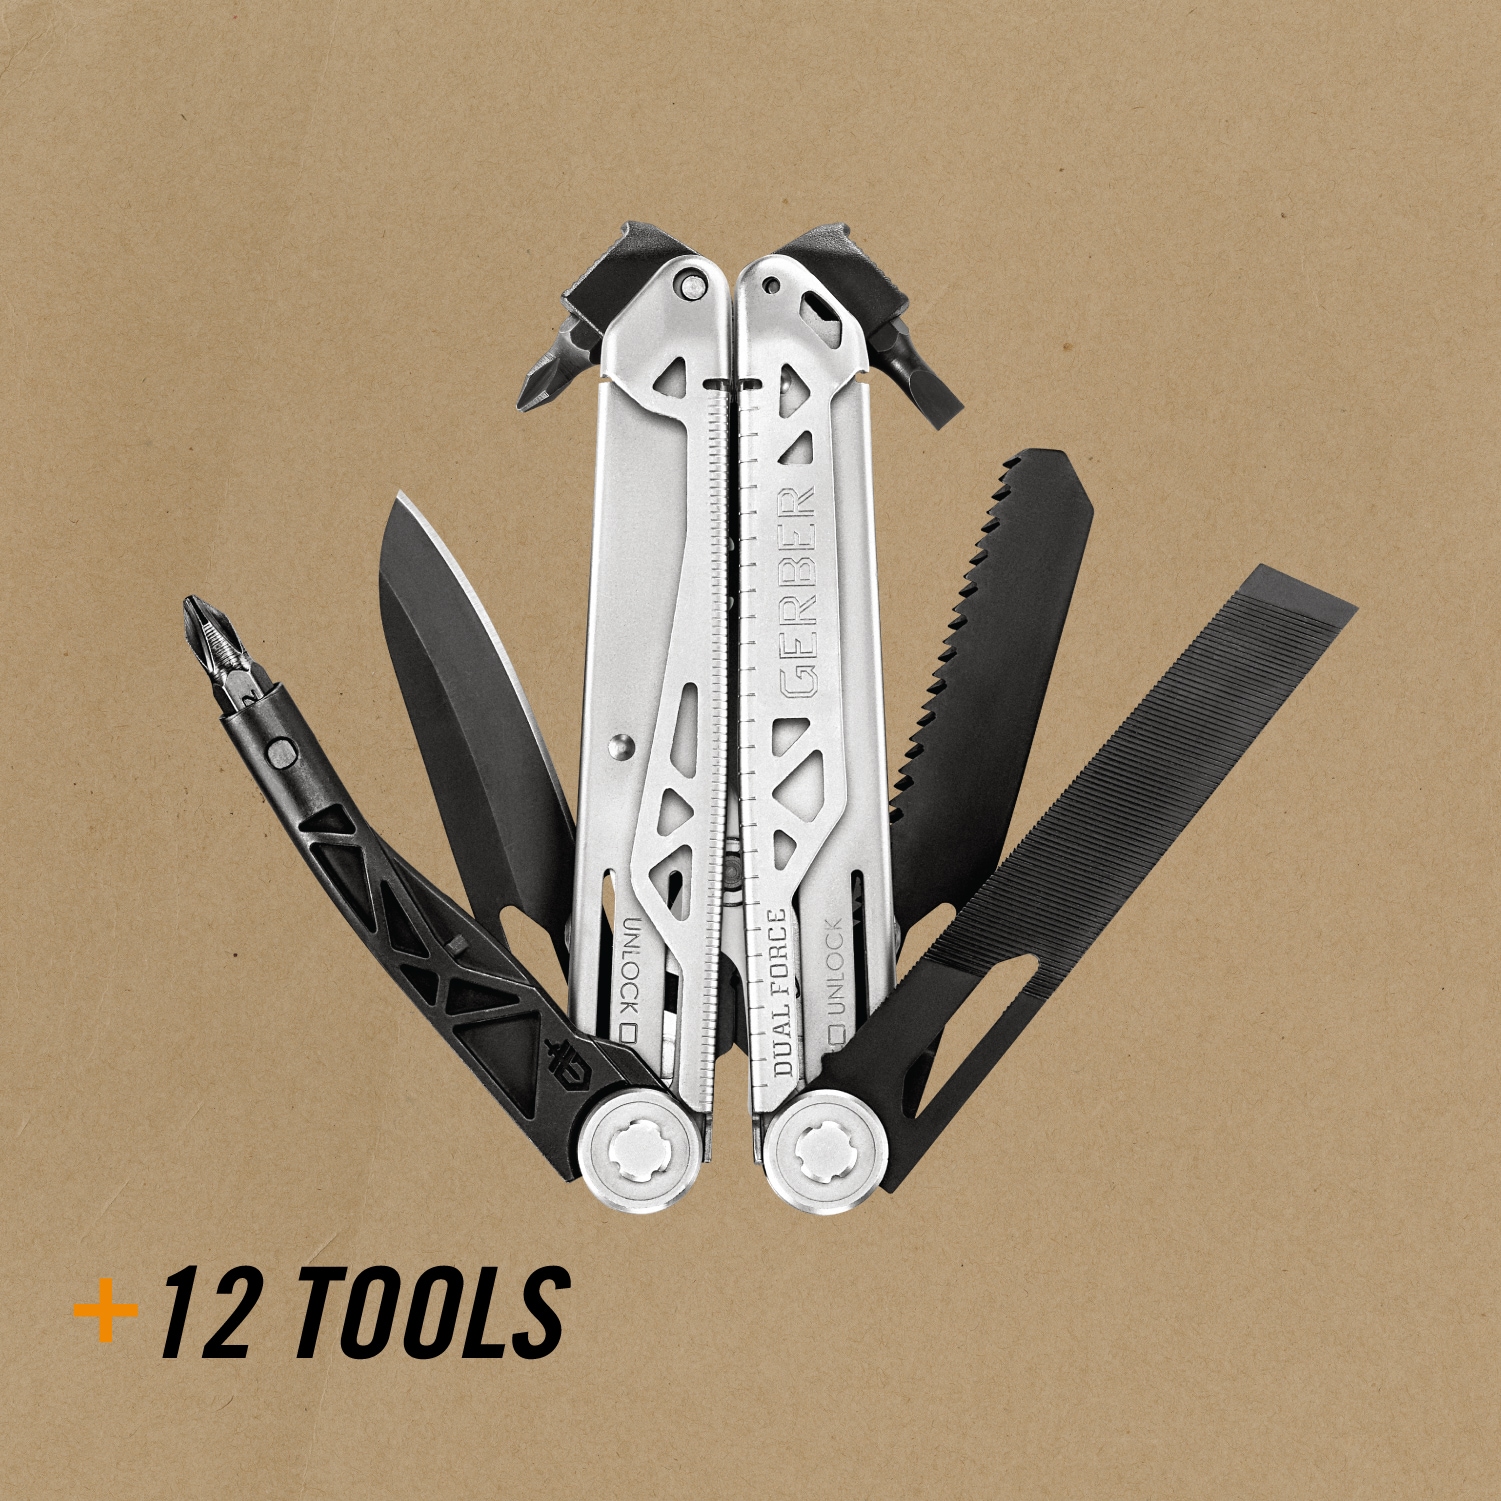  Gerber Gear Suspension-NXT 15-in-1 Multi-Tool Pocket Knife Set  - EDC Gear and Equipment Multi-Tool with Pocket Clip - Stainless Steel :  Everything Else